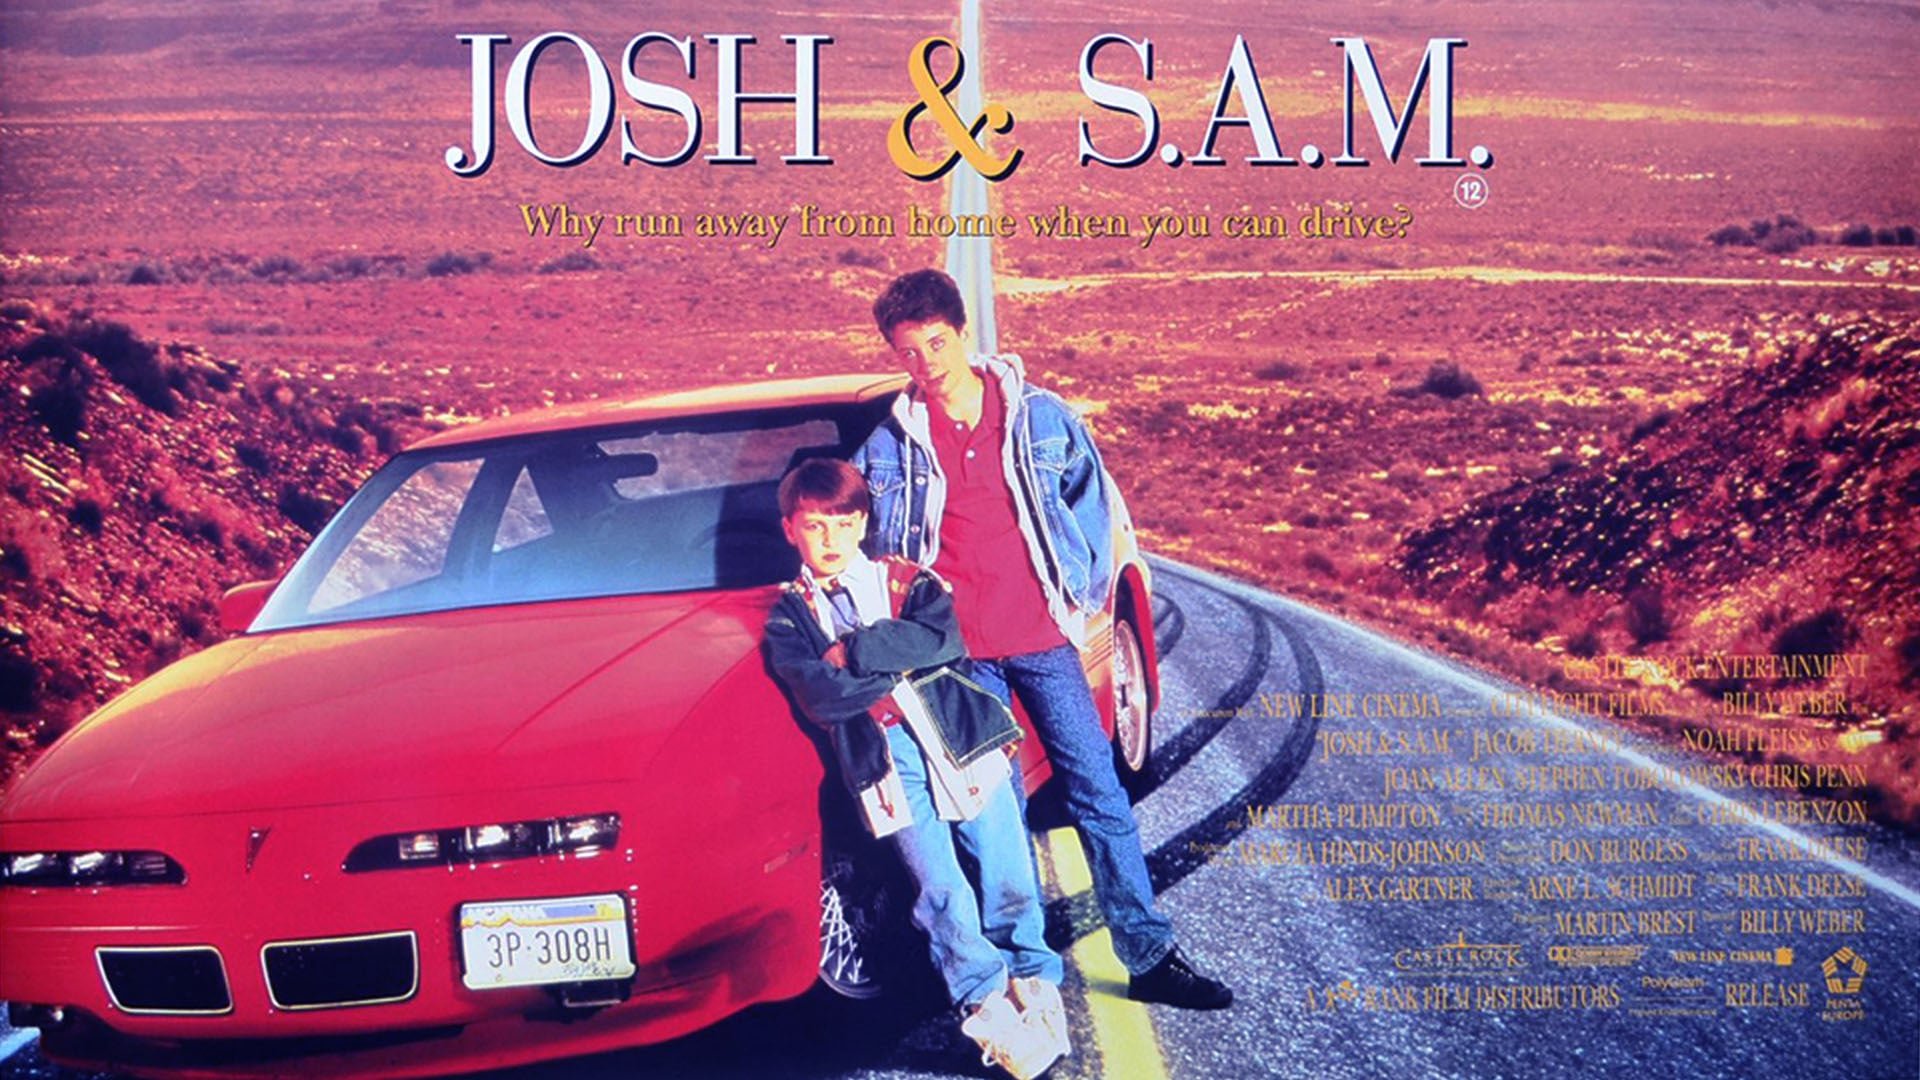 Josh and S.A.M.